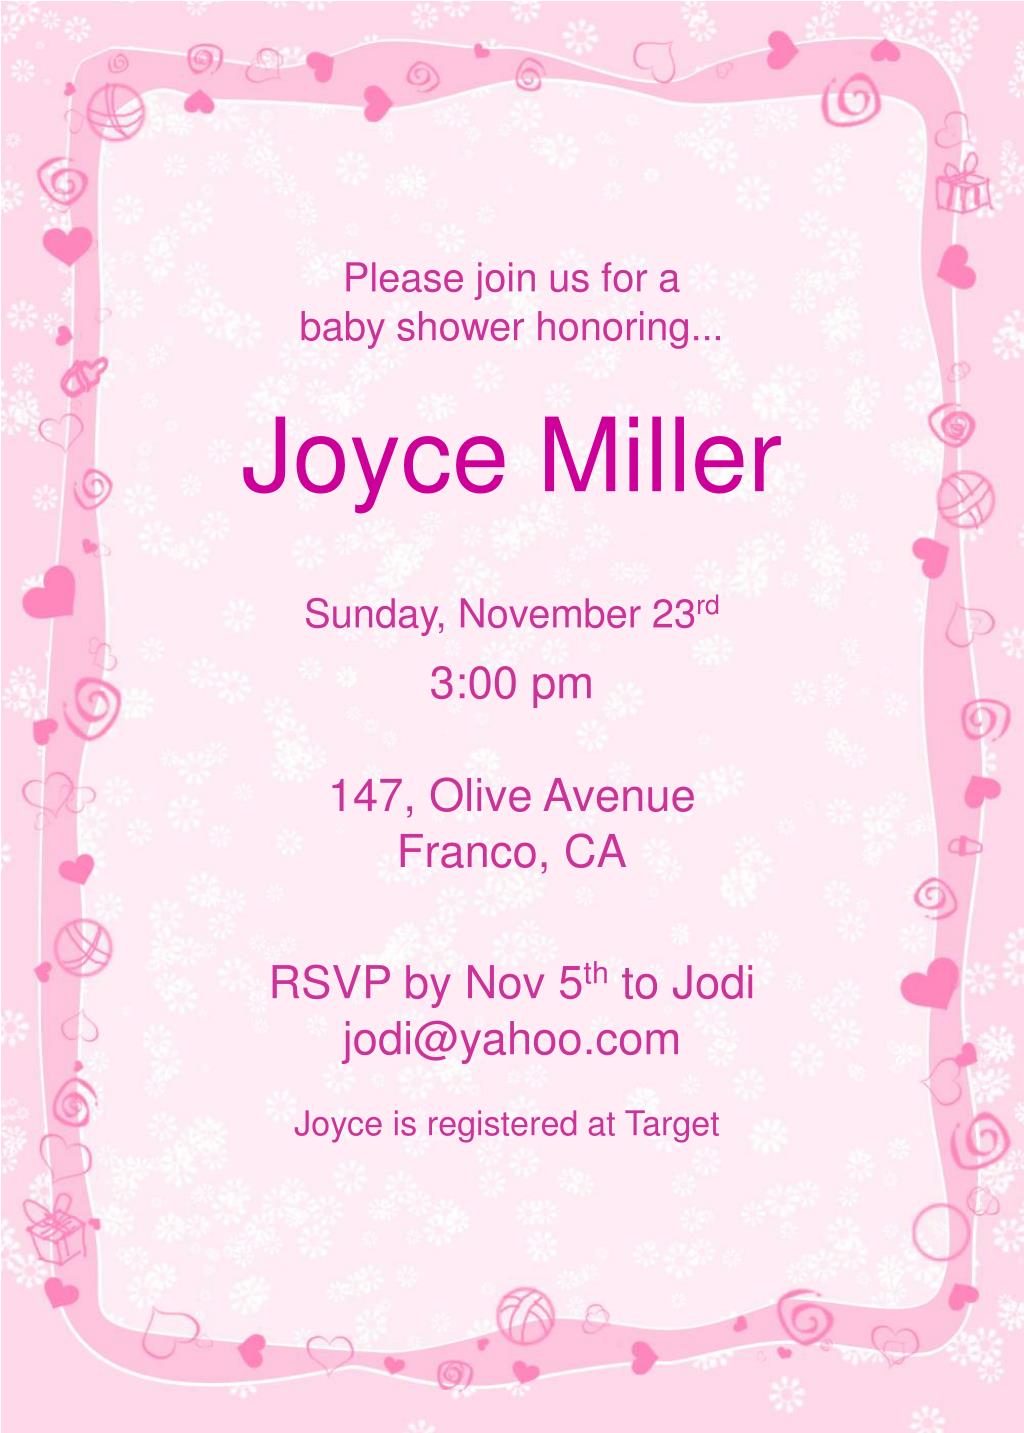 please join us for baby shower honoring